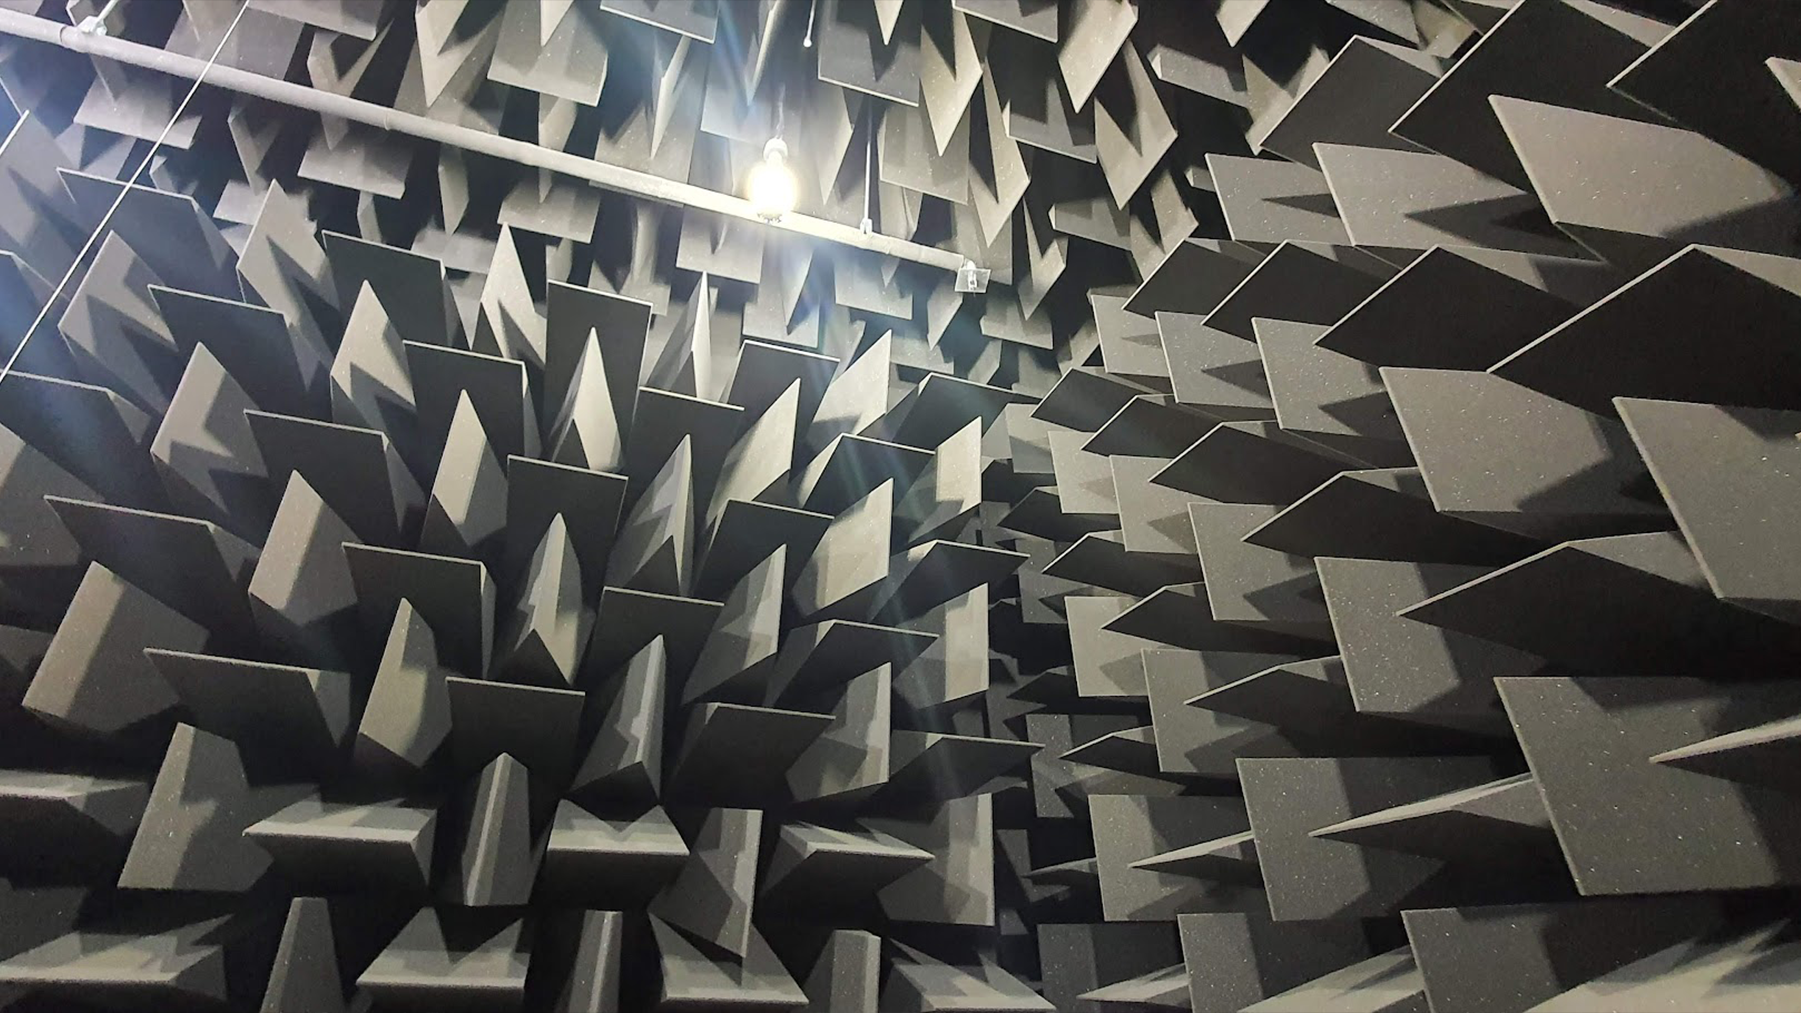 Acoustic Consultant Sydney - Anechoic Chamber, UTS TechLab